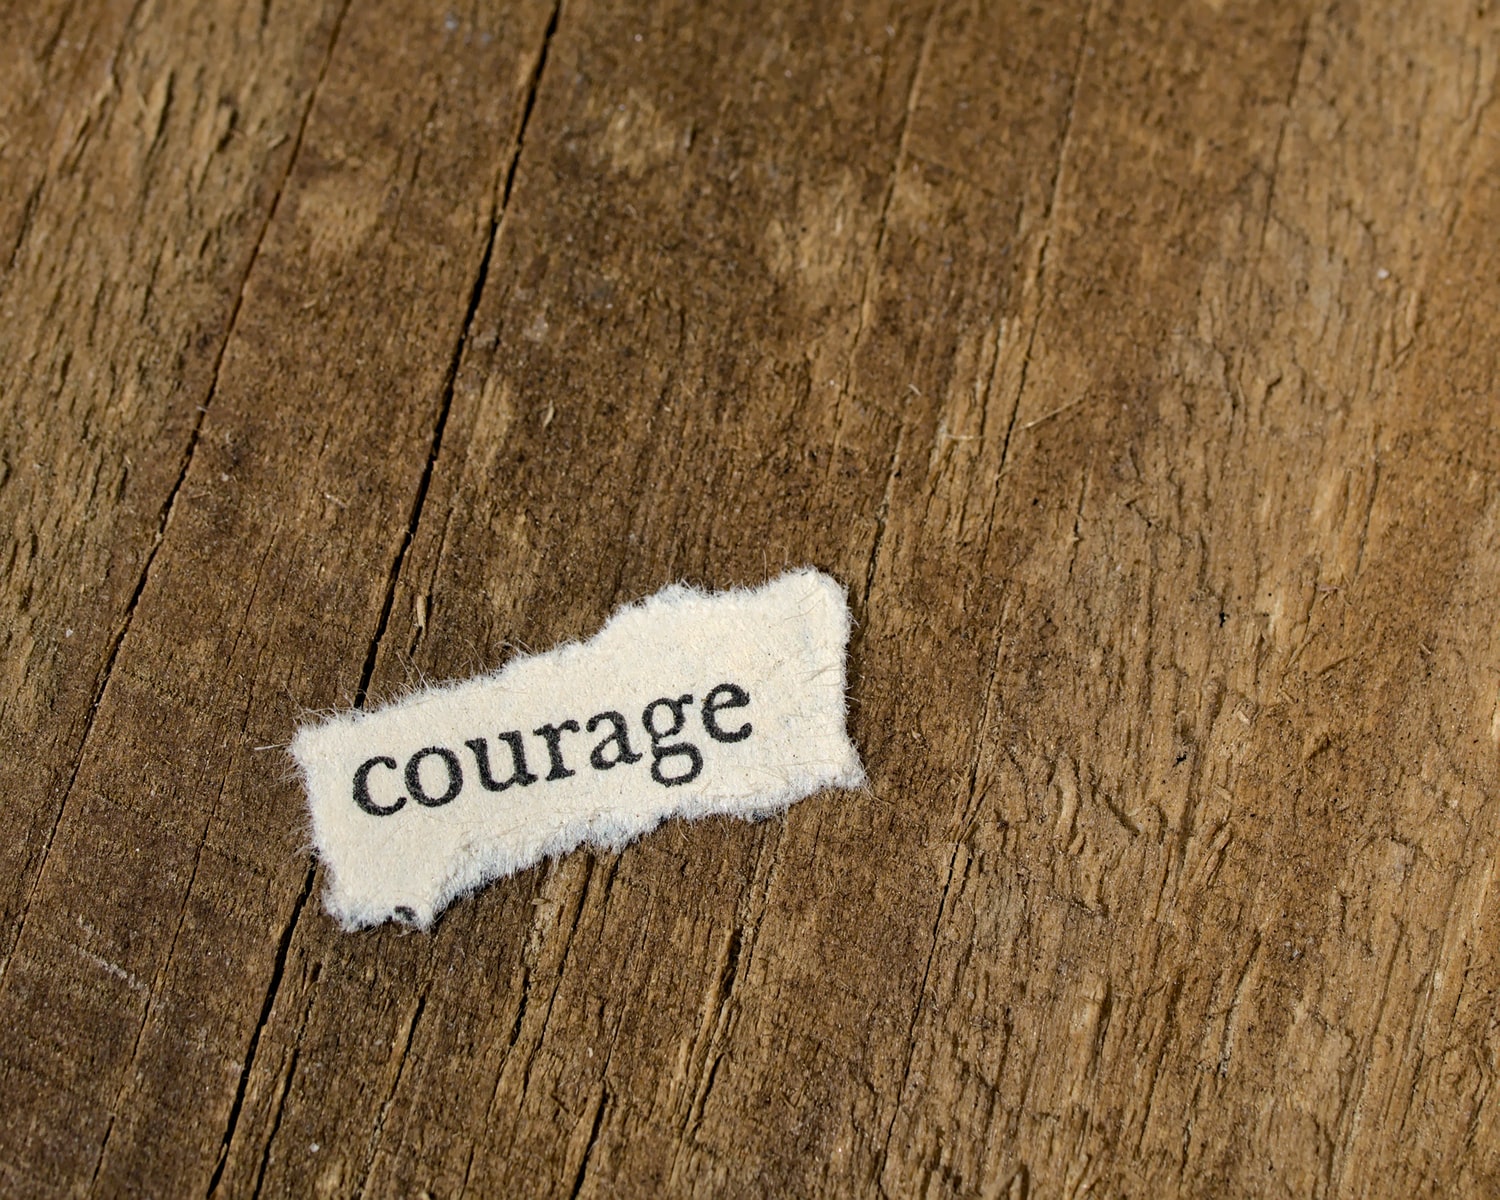 When Serving Requires Courage